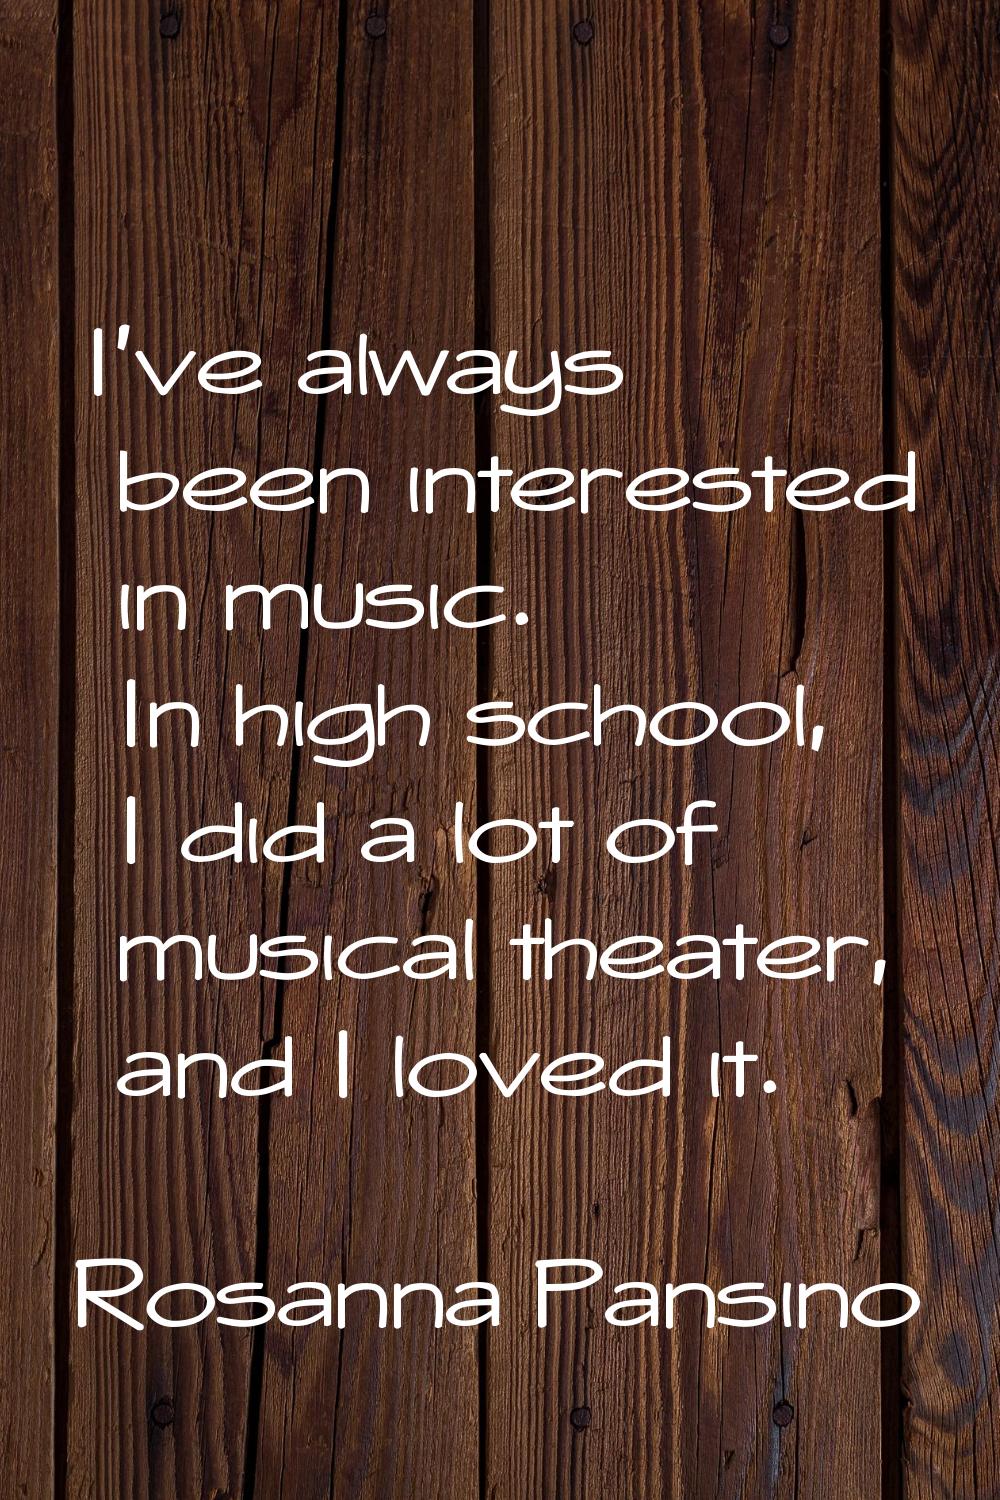 I've always been interested in music. In high school, I did a lot of musical theater, and I loved i